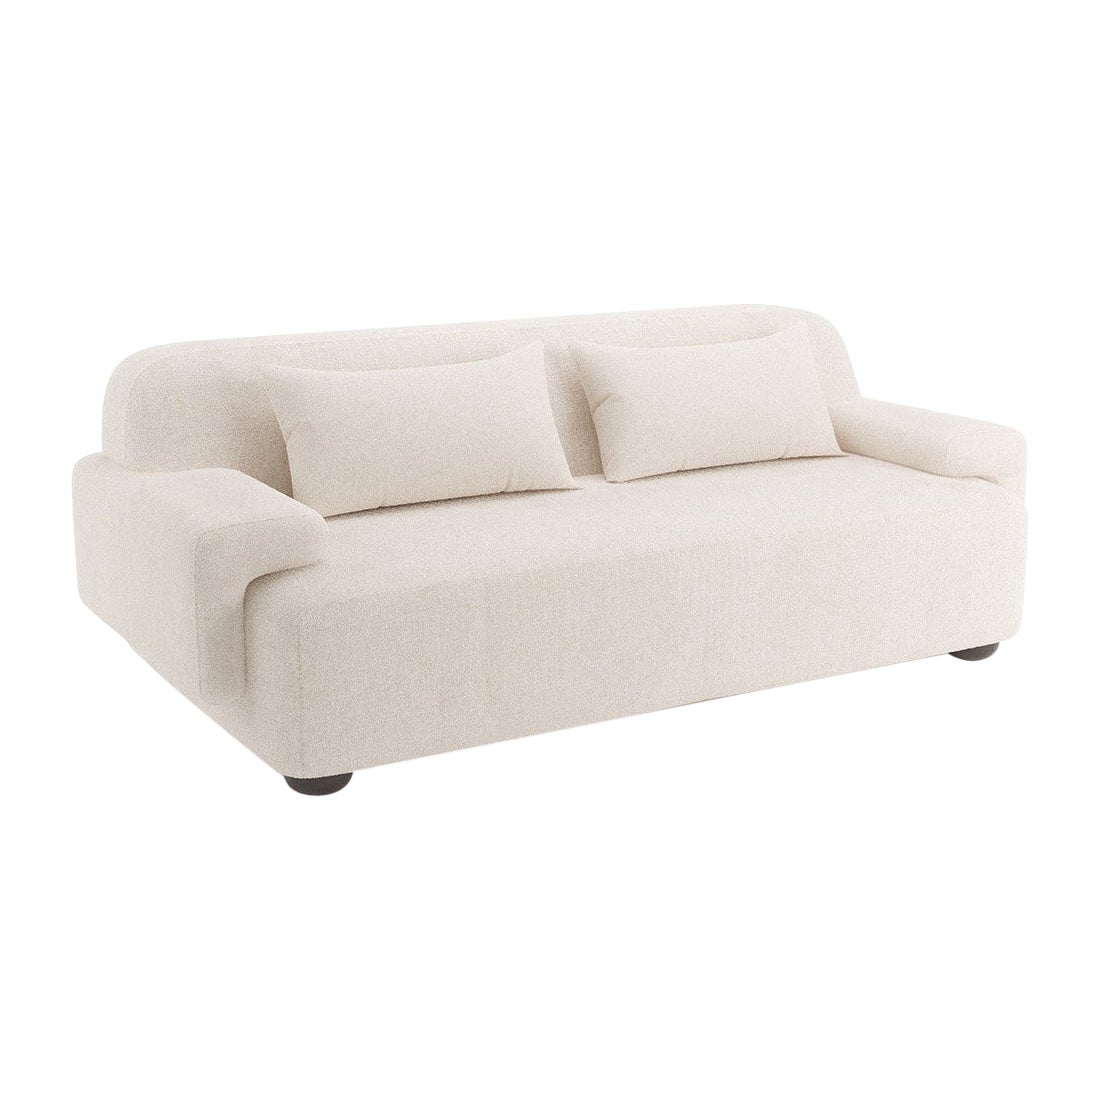 Popus Editions Lena 2.5 Seater Sofa in Macadamia London Linen Fabric For Sale